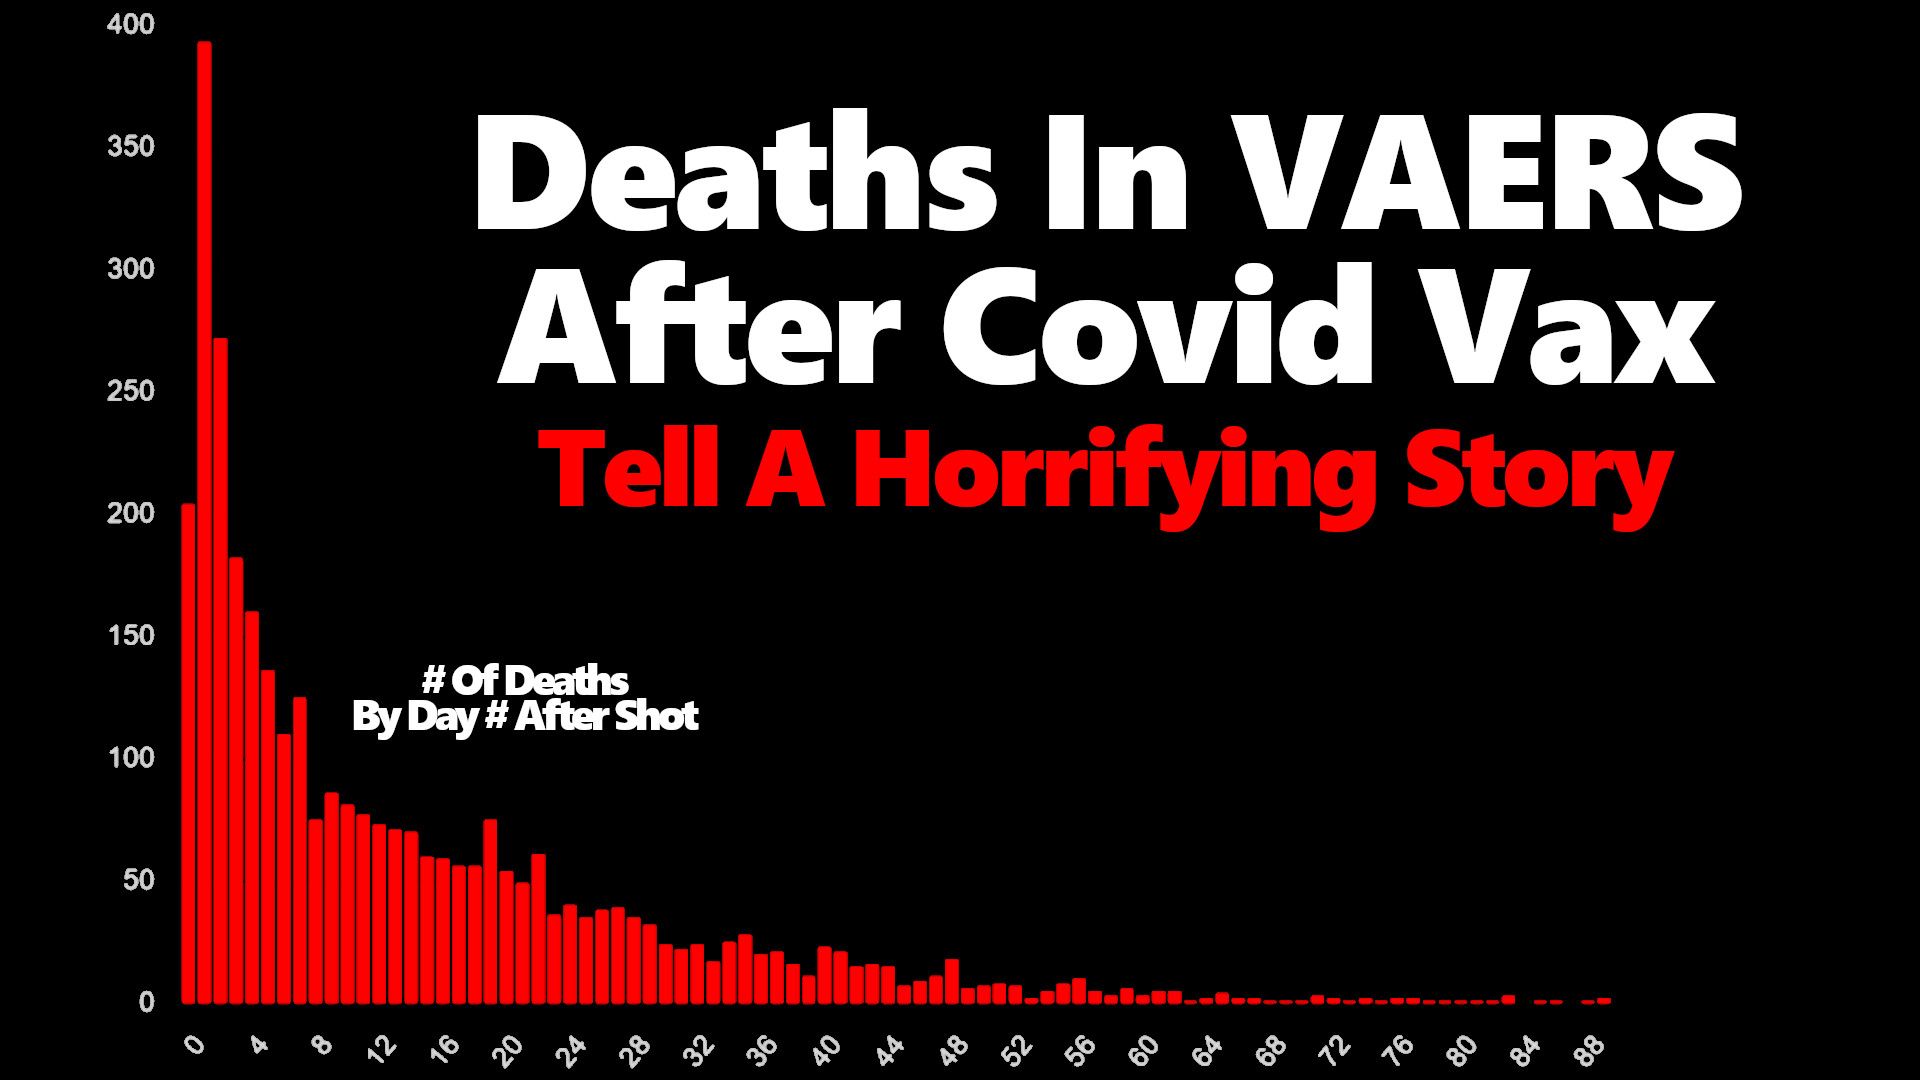 US HHS VAERS Deaths Records Have a Very Pronounced, Concerning Pattern…